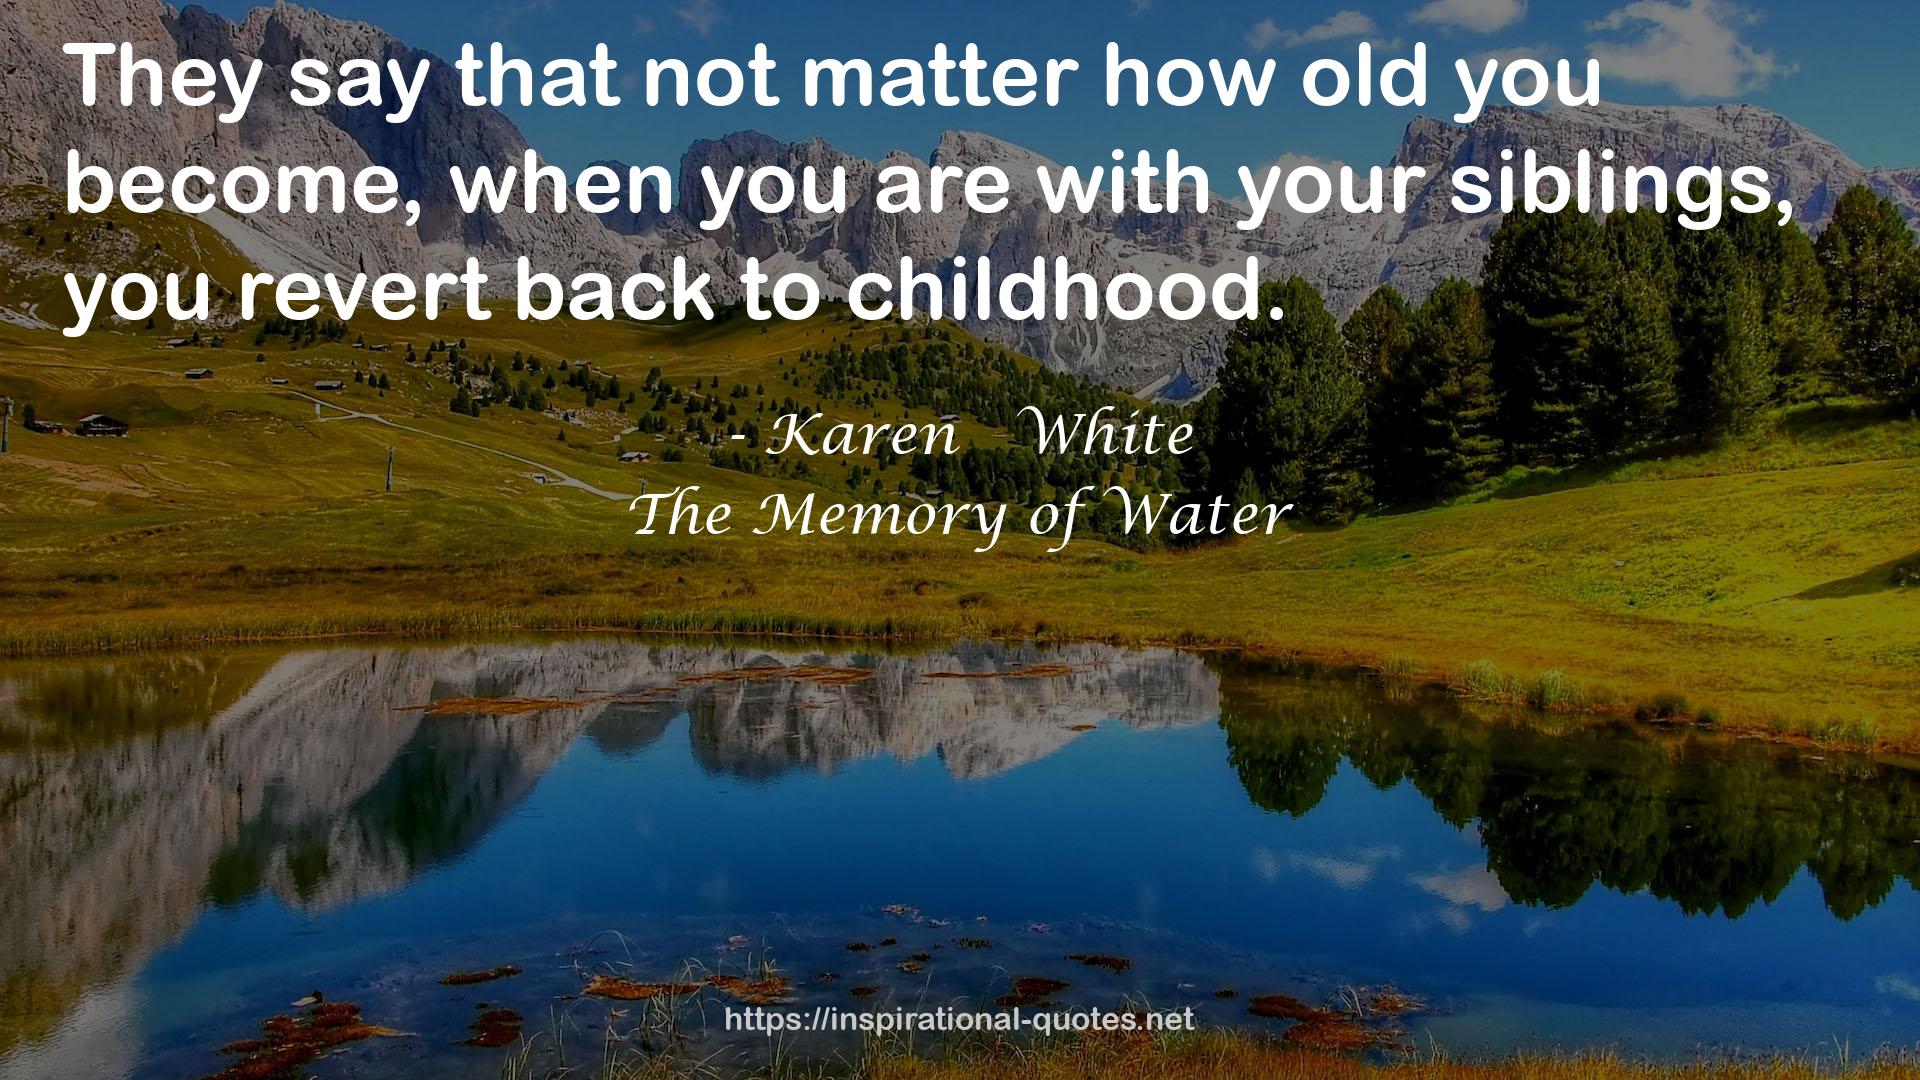 The Memory of Water QUOTES